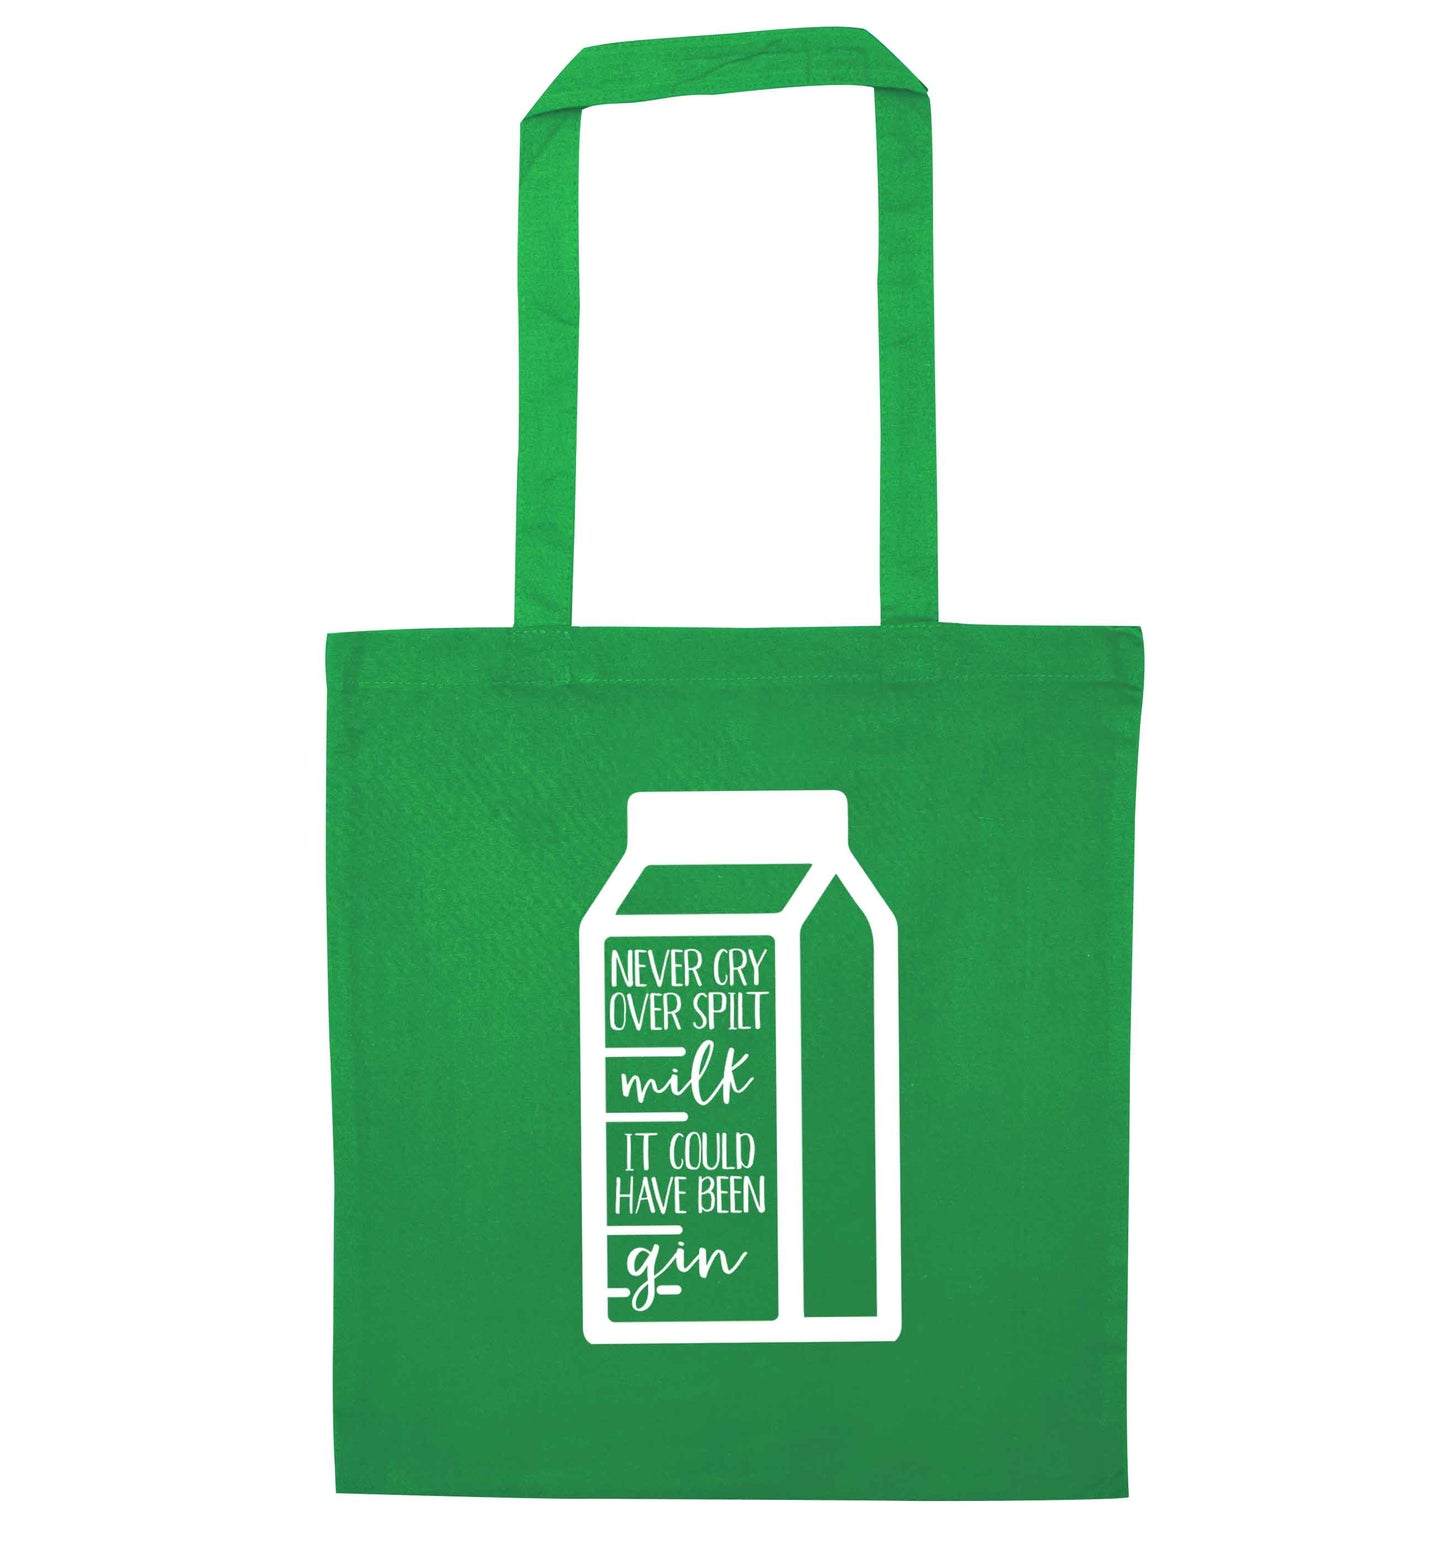 Never cry over spilt milk, it could have been gin green tote bag